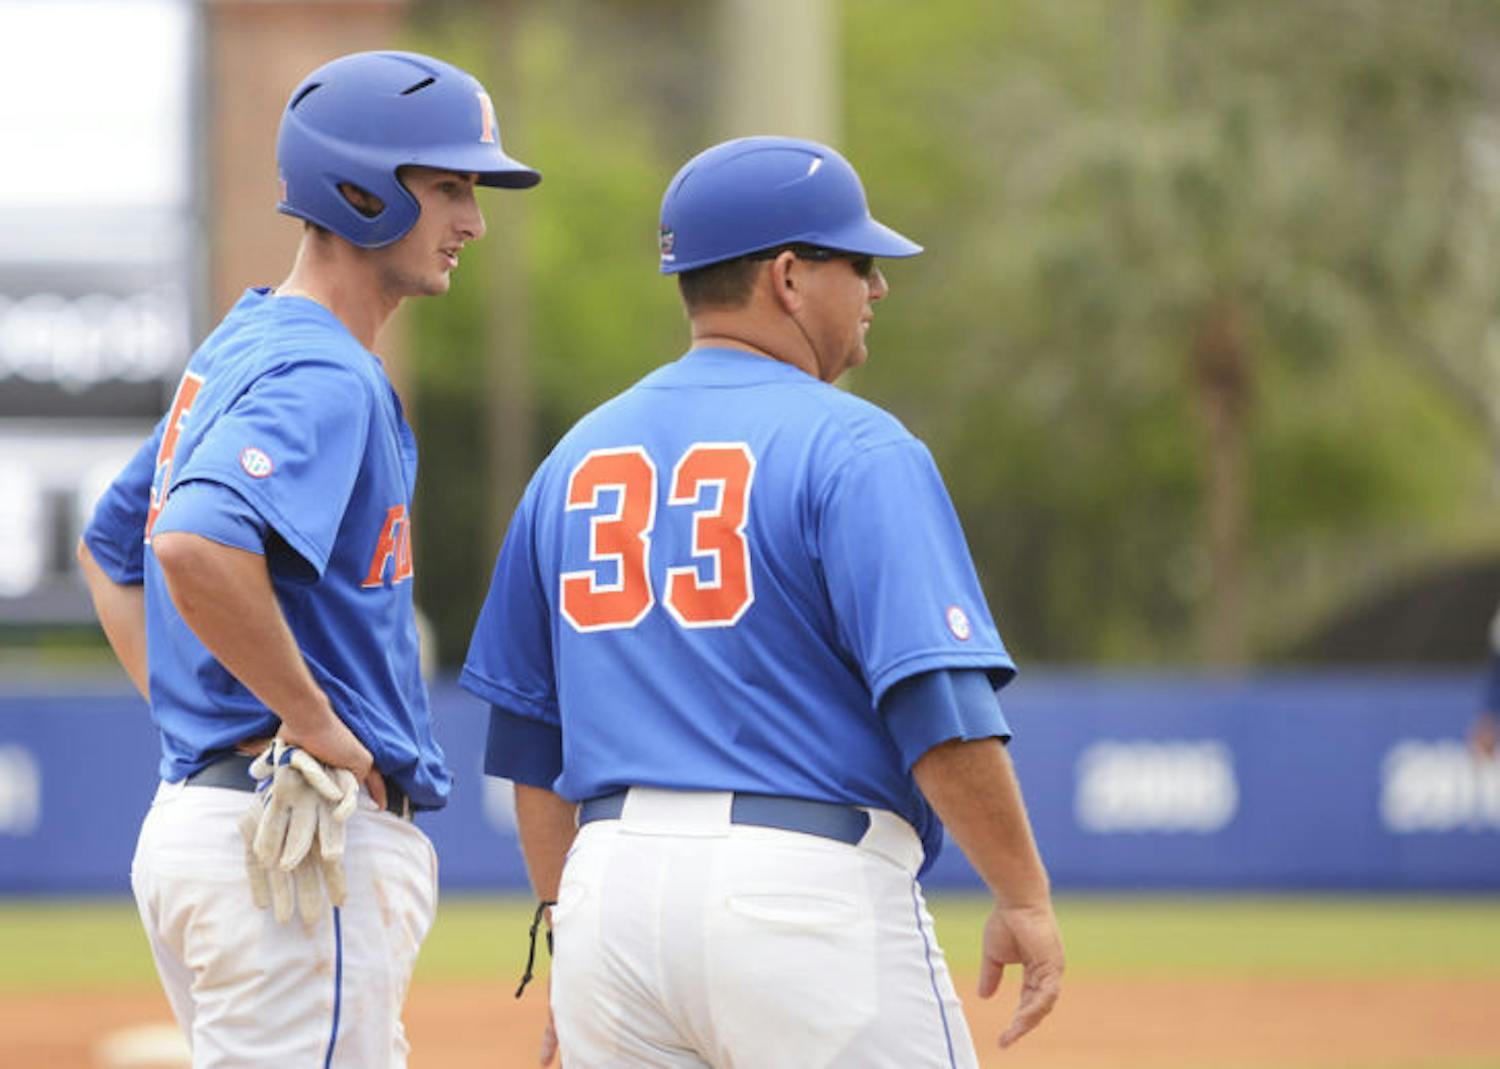 Infielder Zack Powers (5) speaks to assistant coach Craig Bell on third base during Florida’s 7-4 loss to Florida Gulf Coast on Feb. 24 at McKethan Stadium. Powers is 1 for 8 in the series against No. 10 Kentucky.